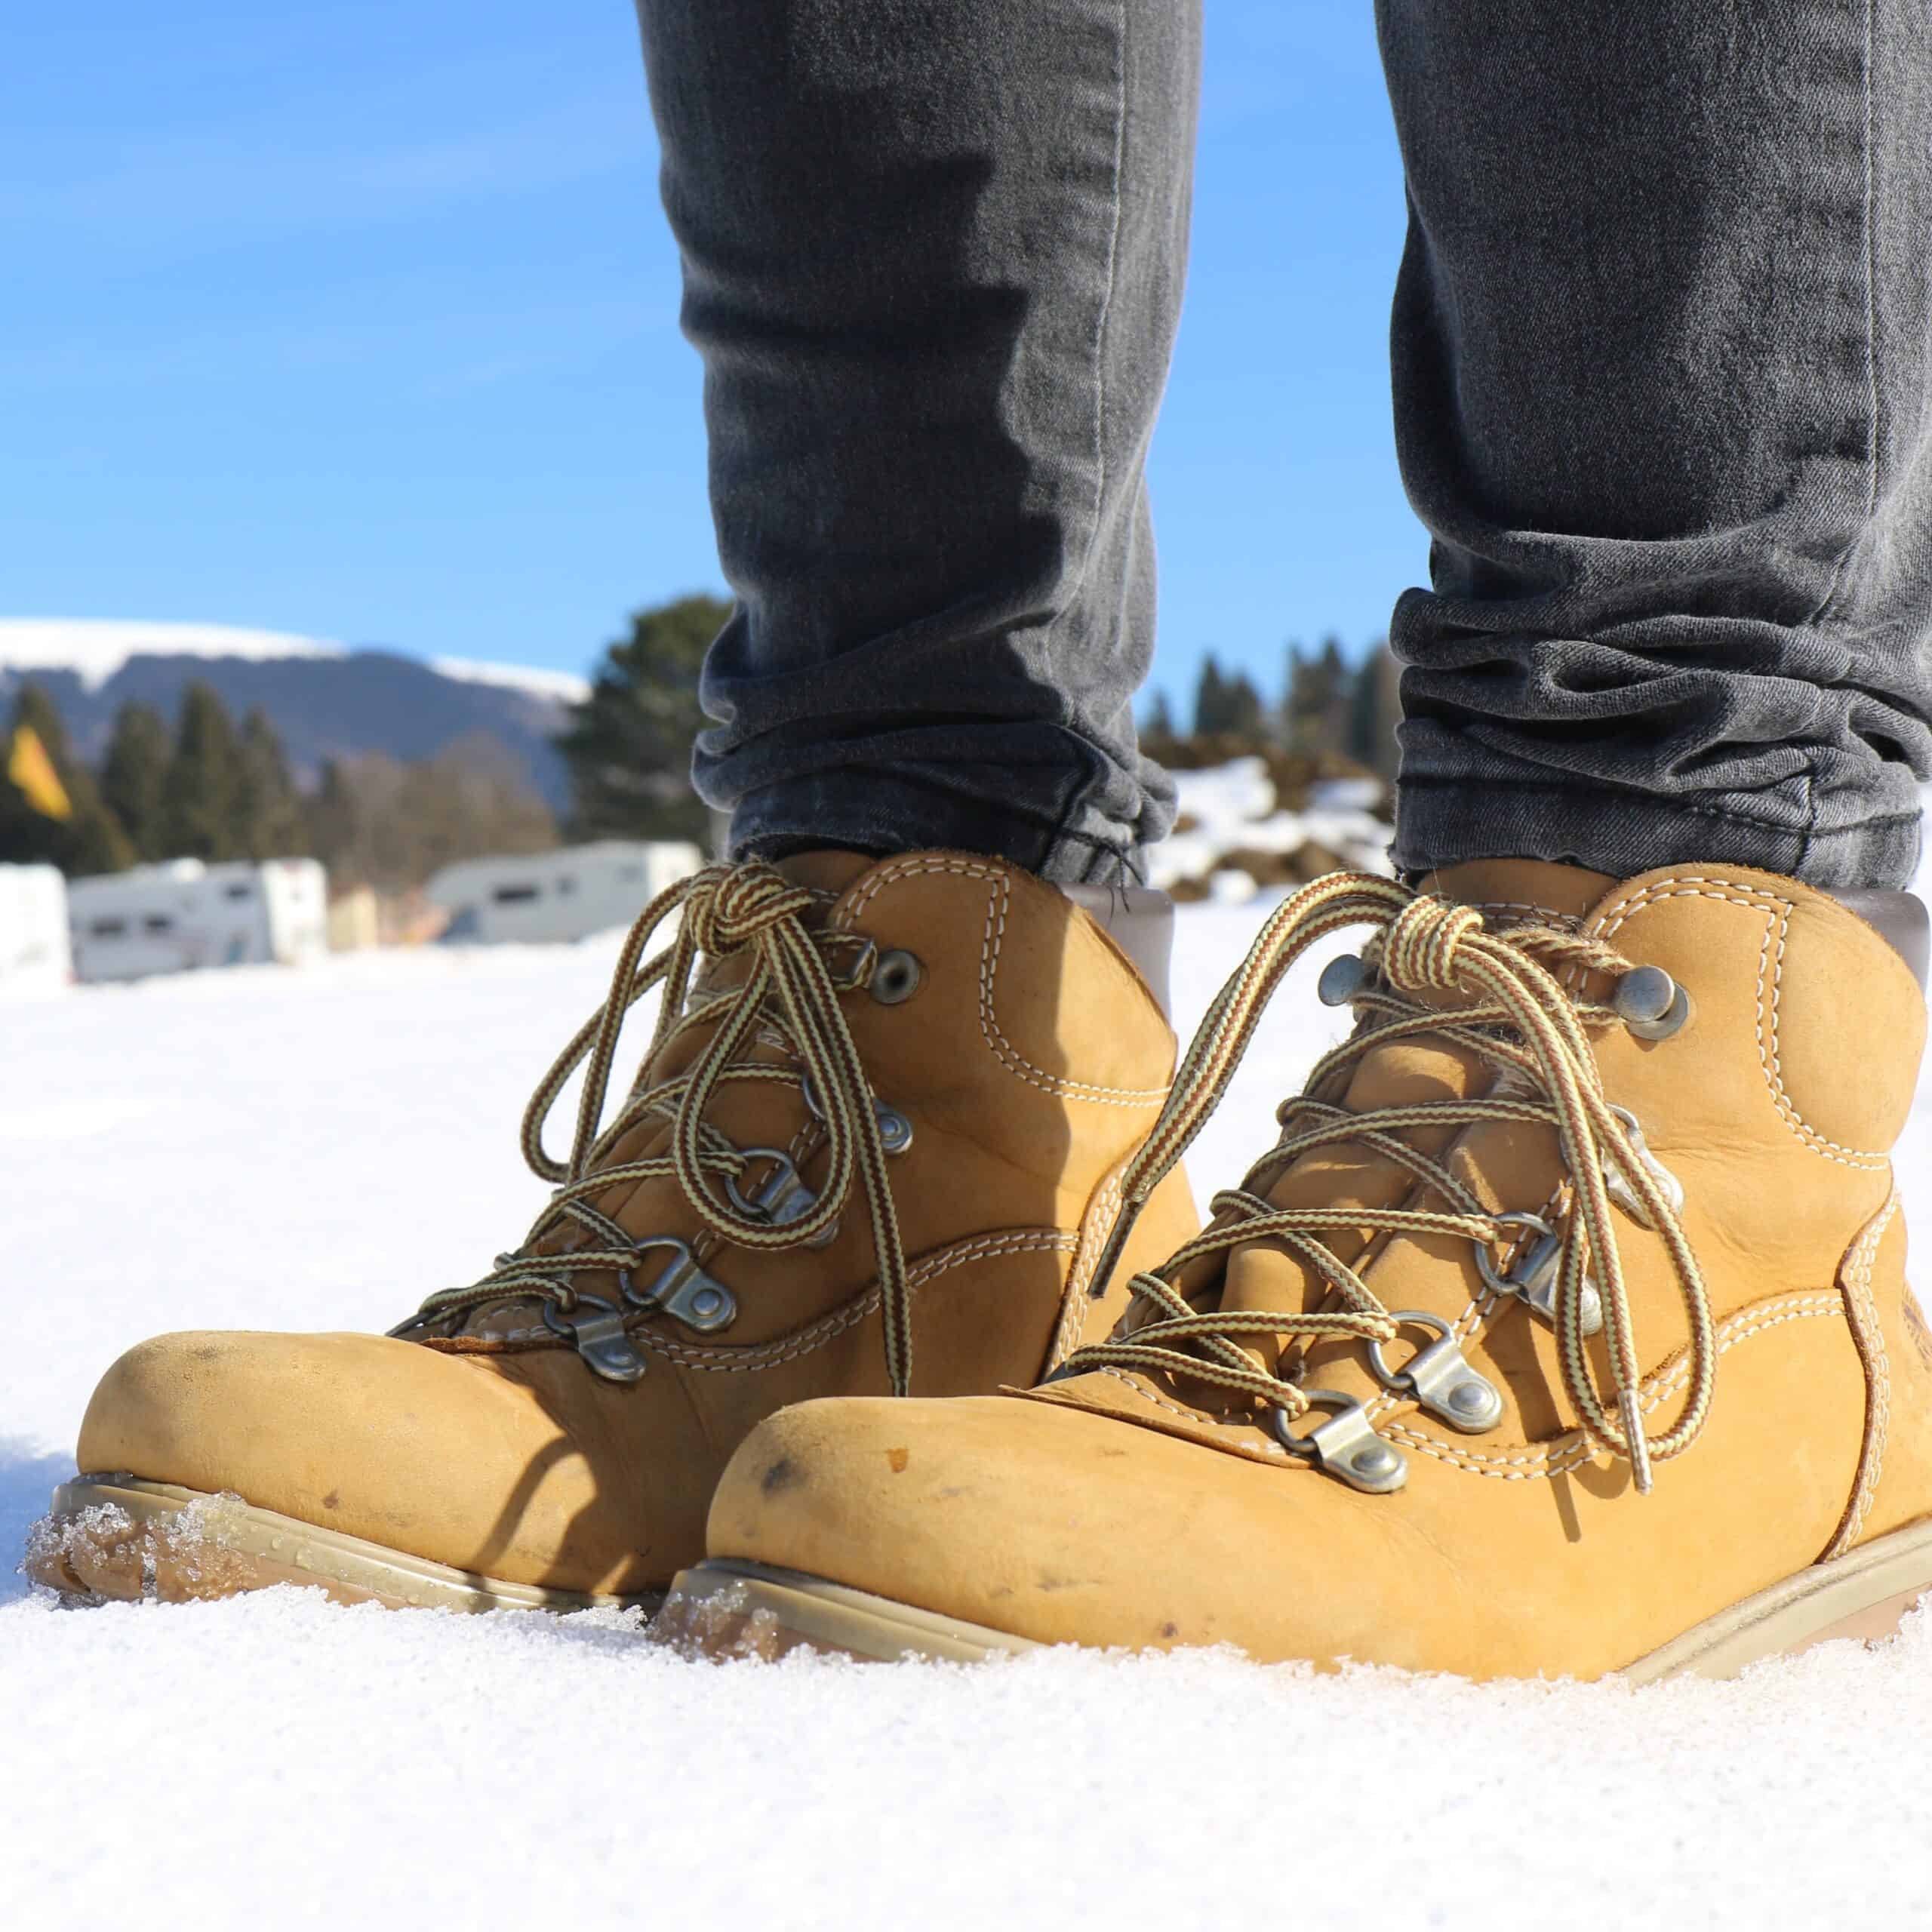 How To Clean Winter Boots? 7 Simple Steps That Work